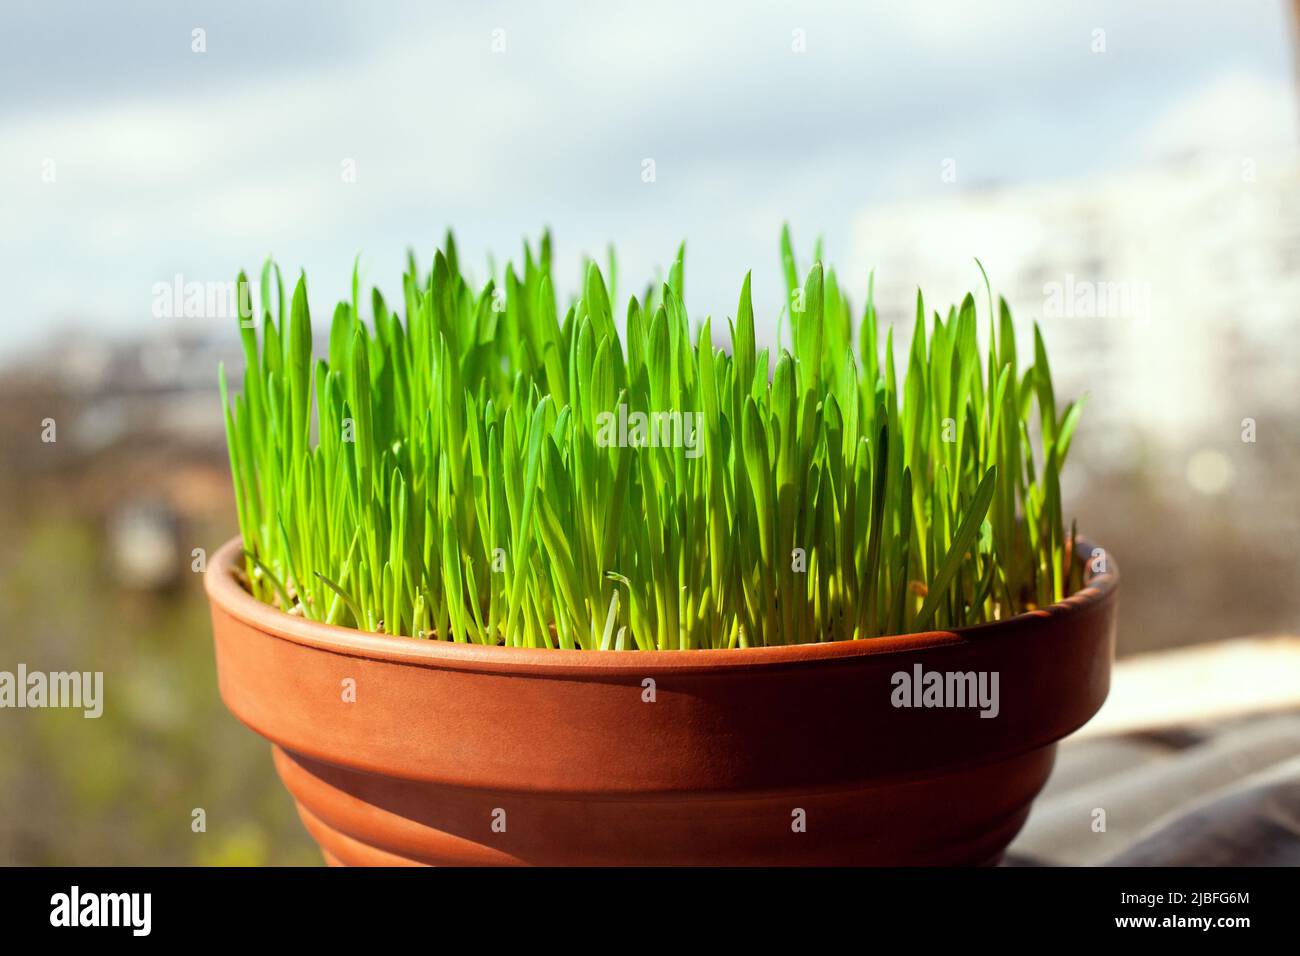 Green grass grows in a ceramic flower pot. Growing cat grass at home balcony. Oat grass plant in terracotta pot close up. Stock Photo